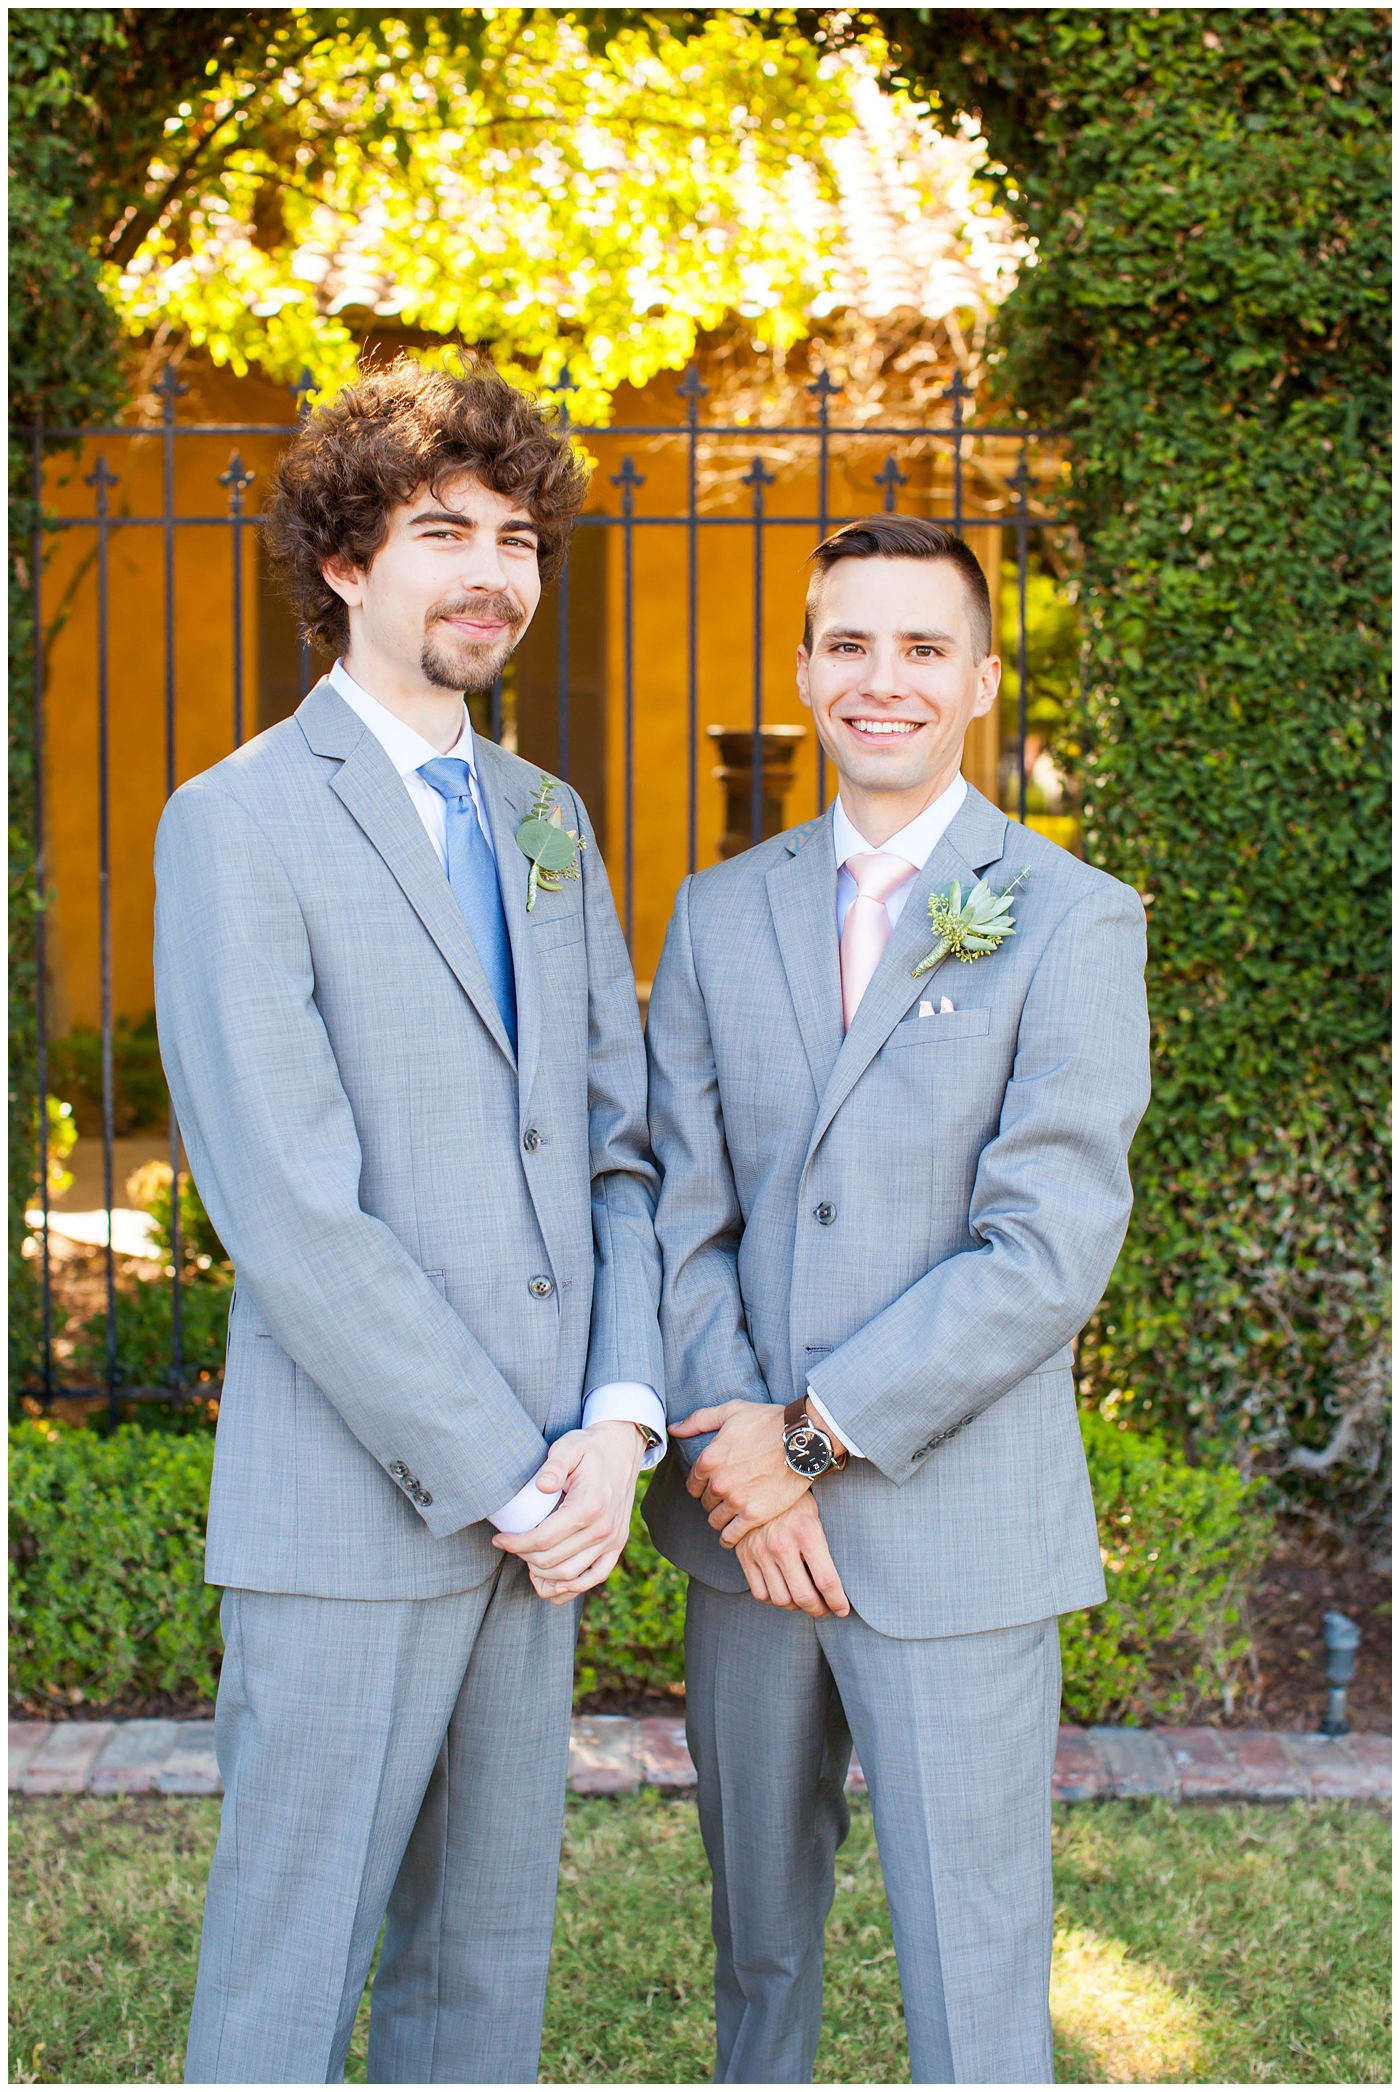 Groom with Best man in gray suits